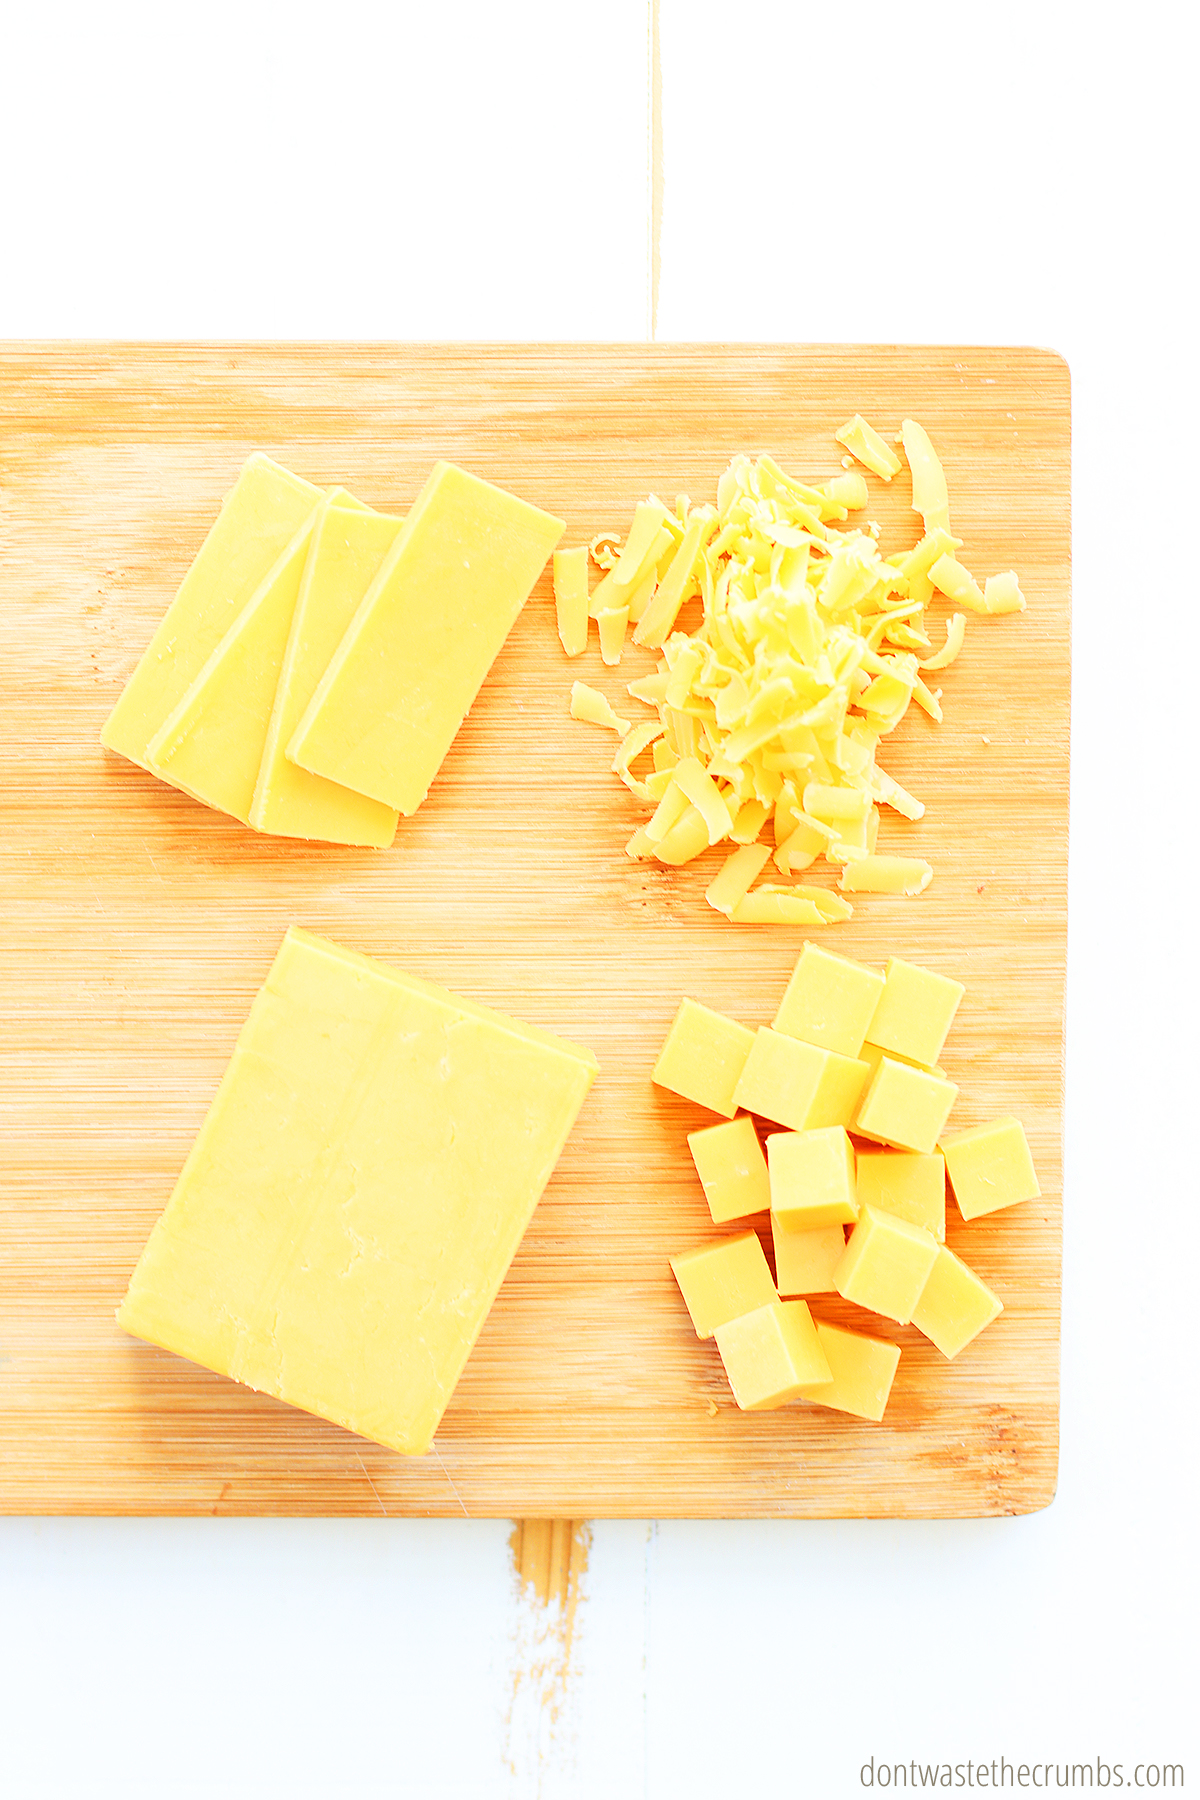 Sliced cheese, shredded cheese, a block of cheese, and cubes of cheese on a wood cutting board.